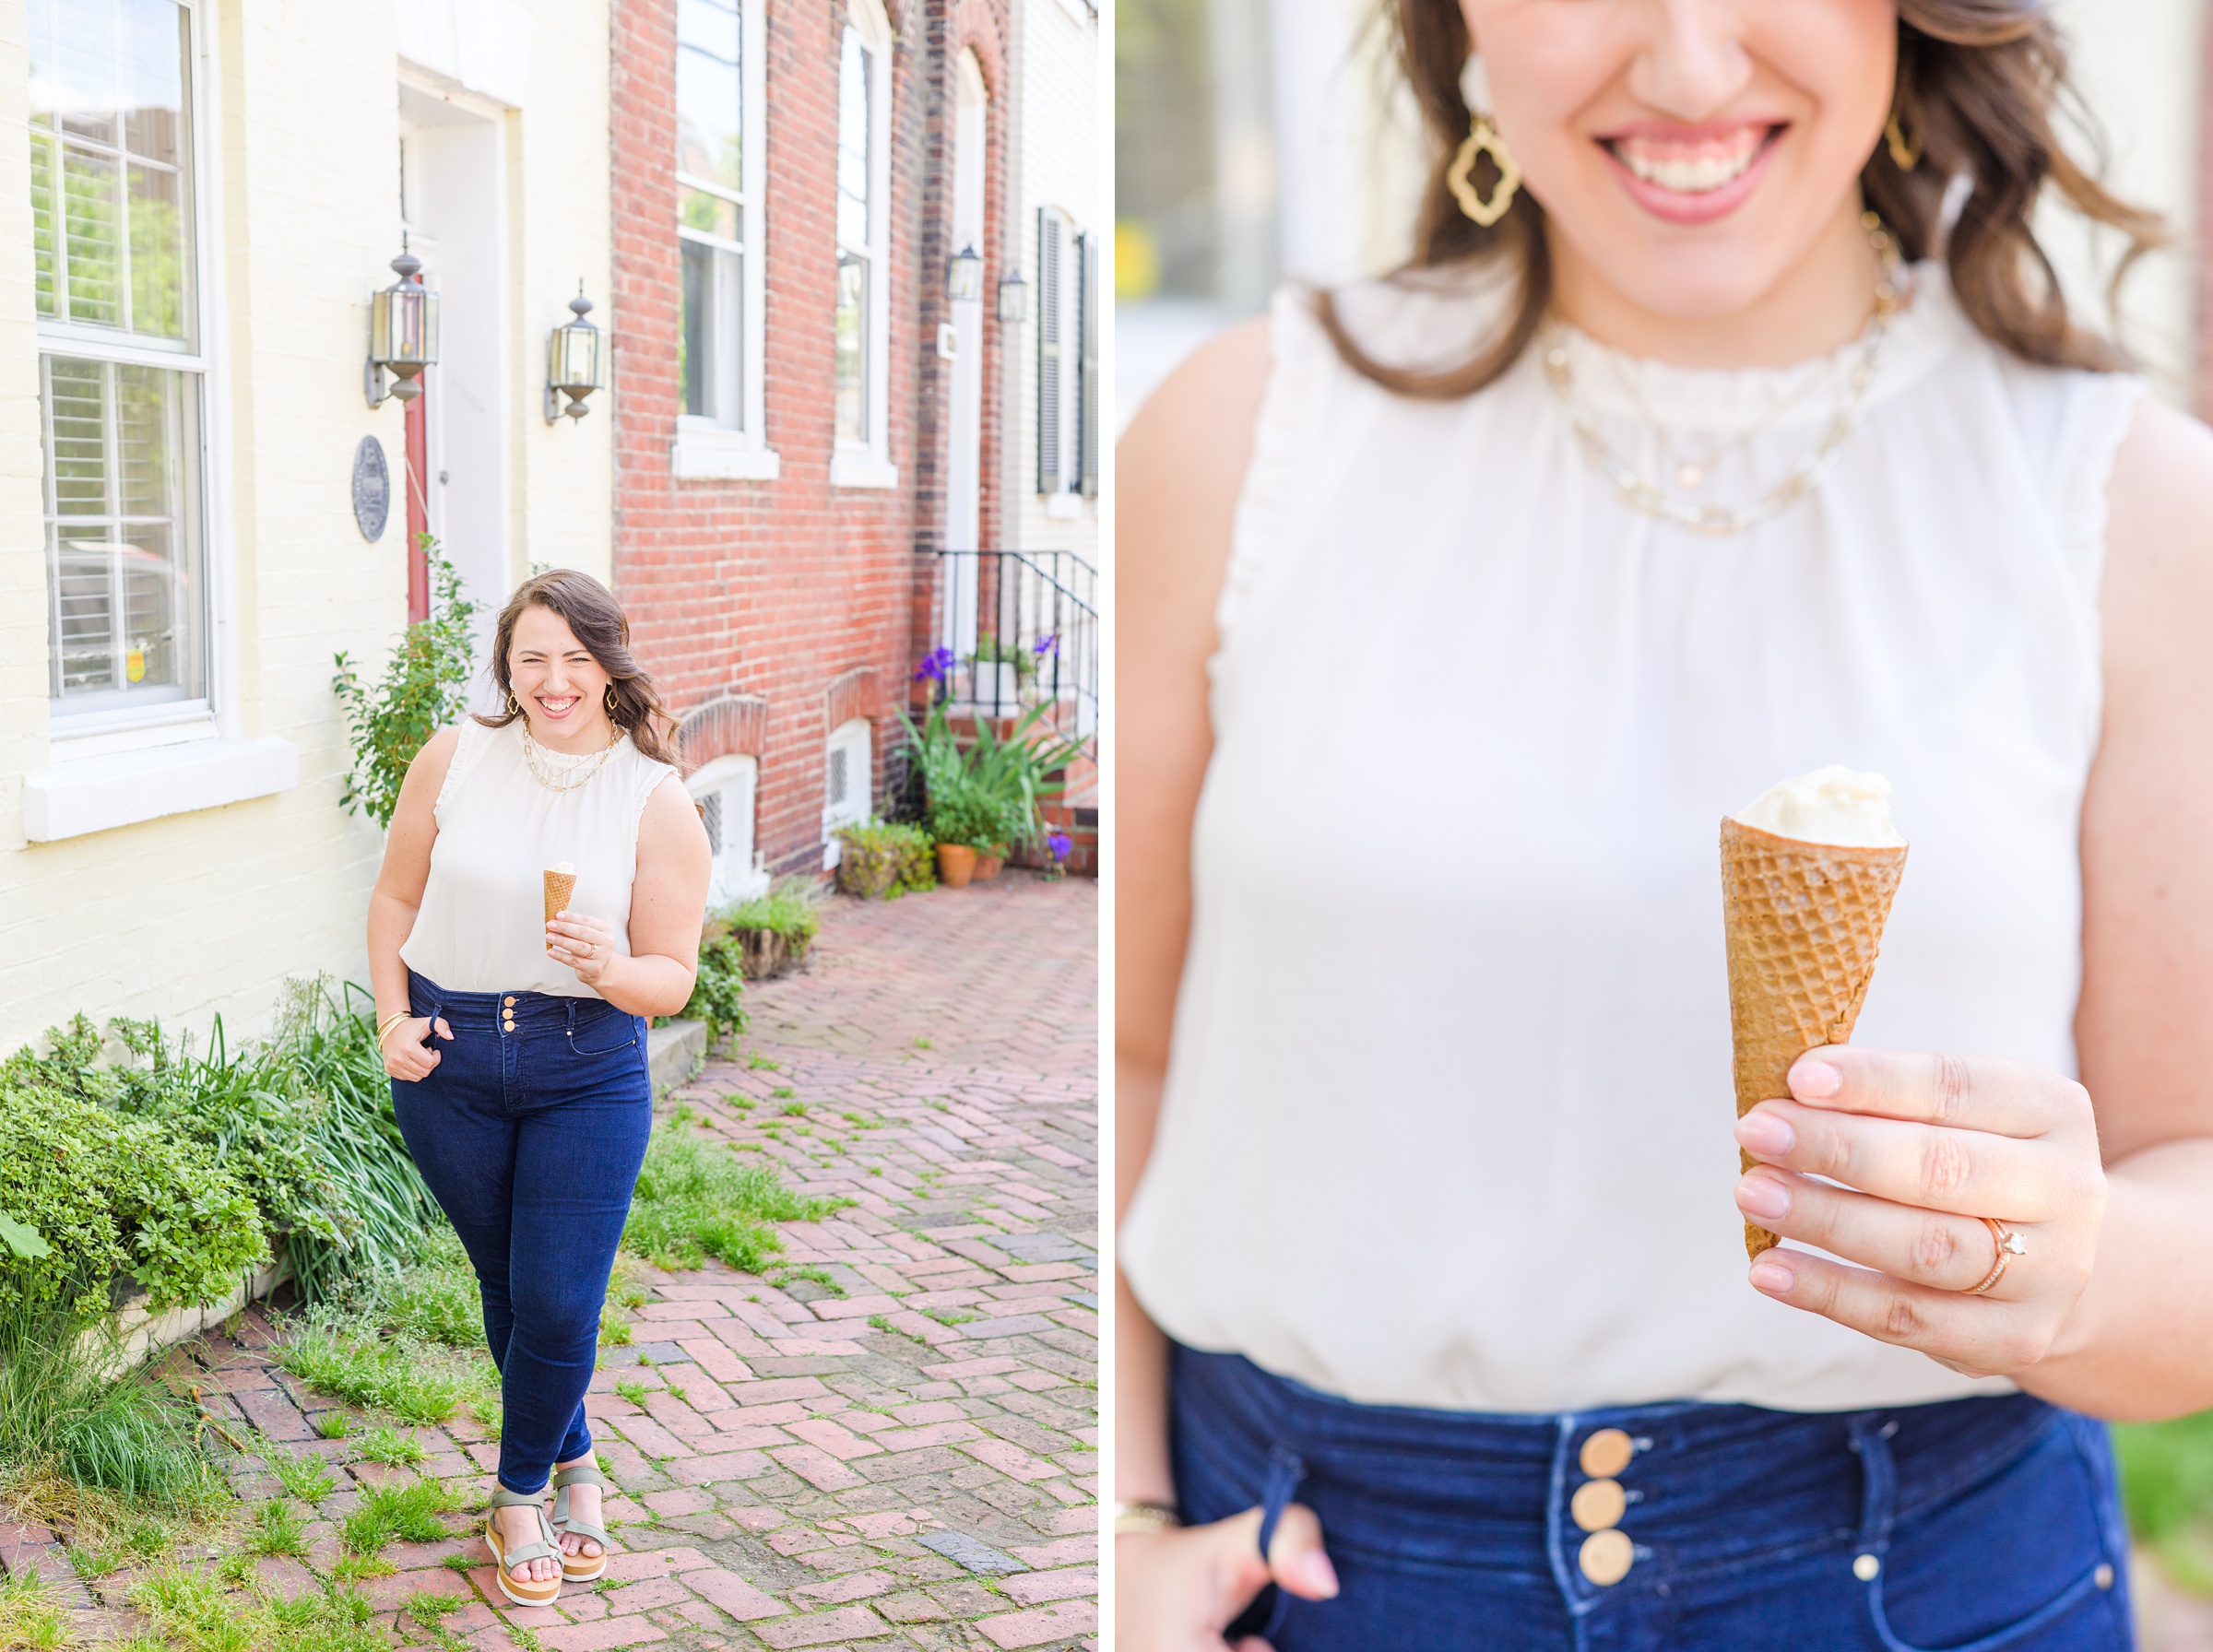 Emily Nicole Photography brand photography session in Old Town Alexandria photographed by Maryland Brand Photographer Cait Kramer